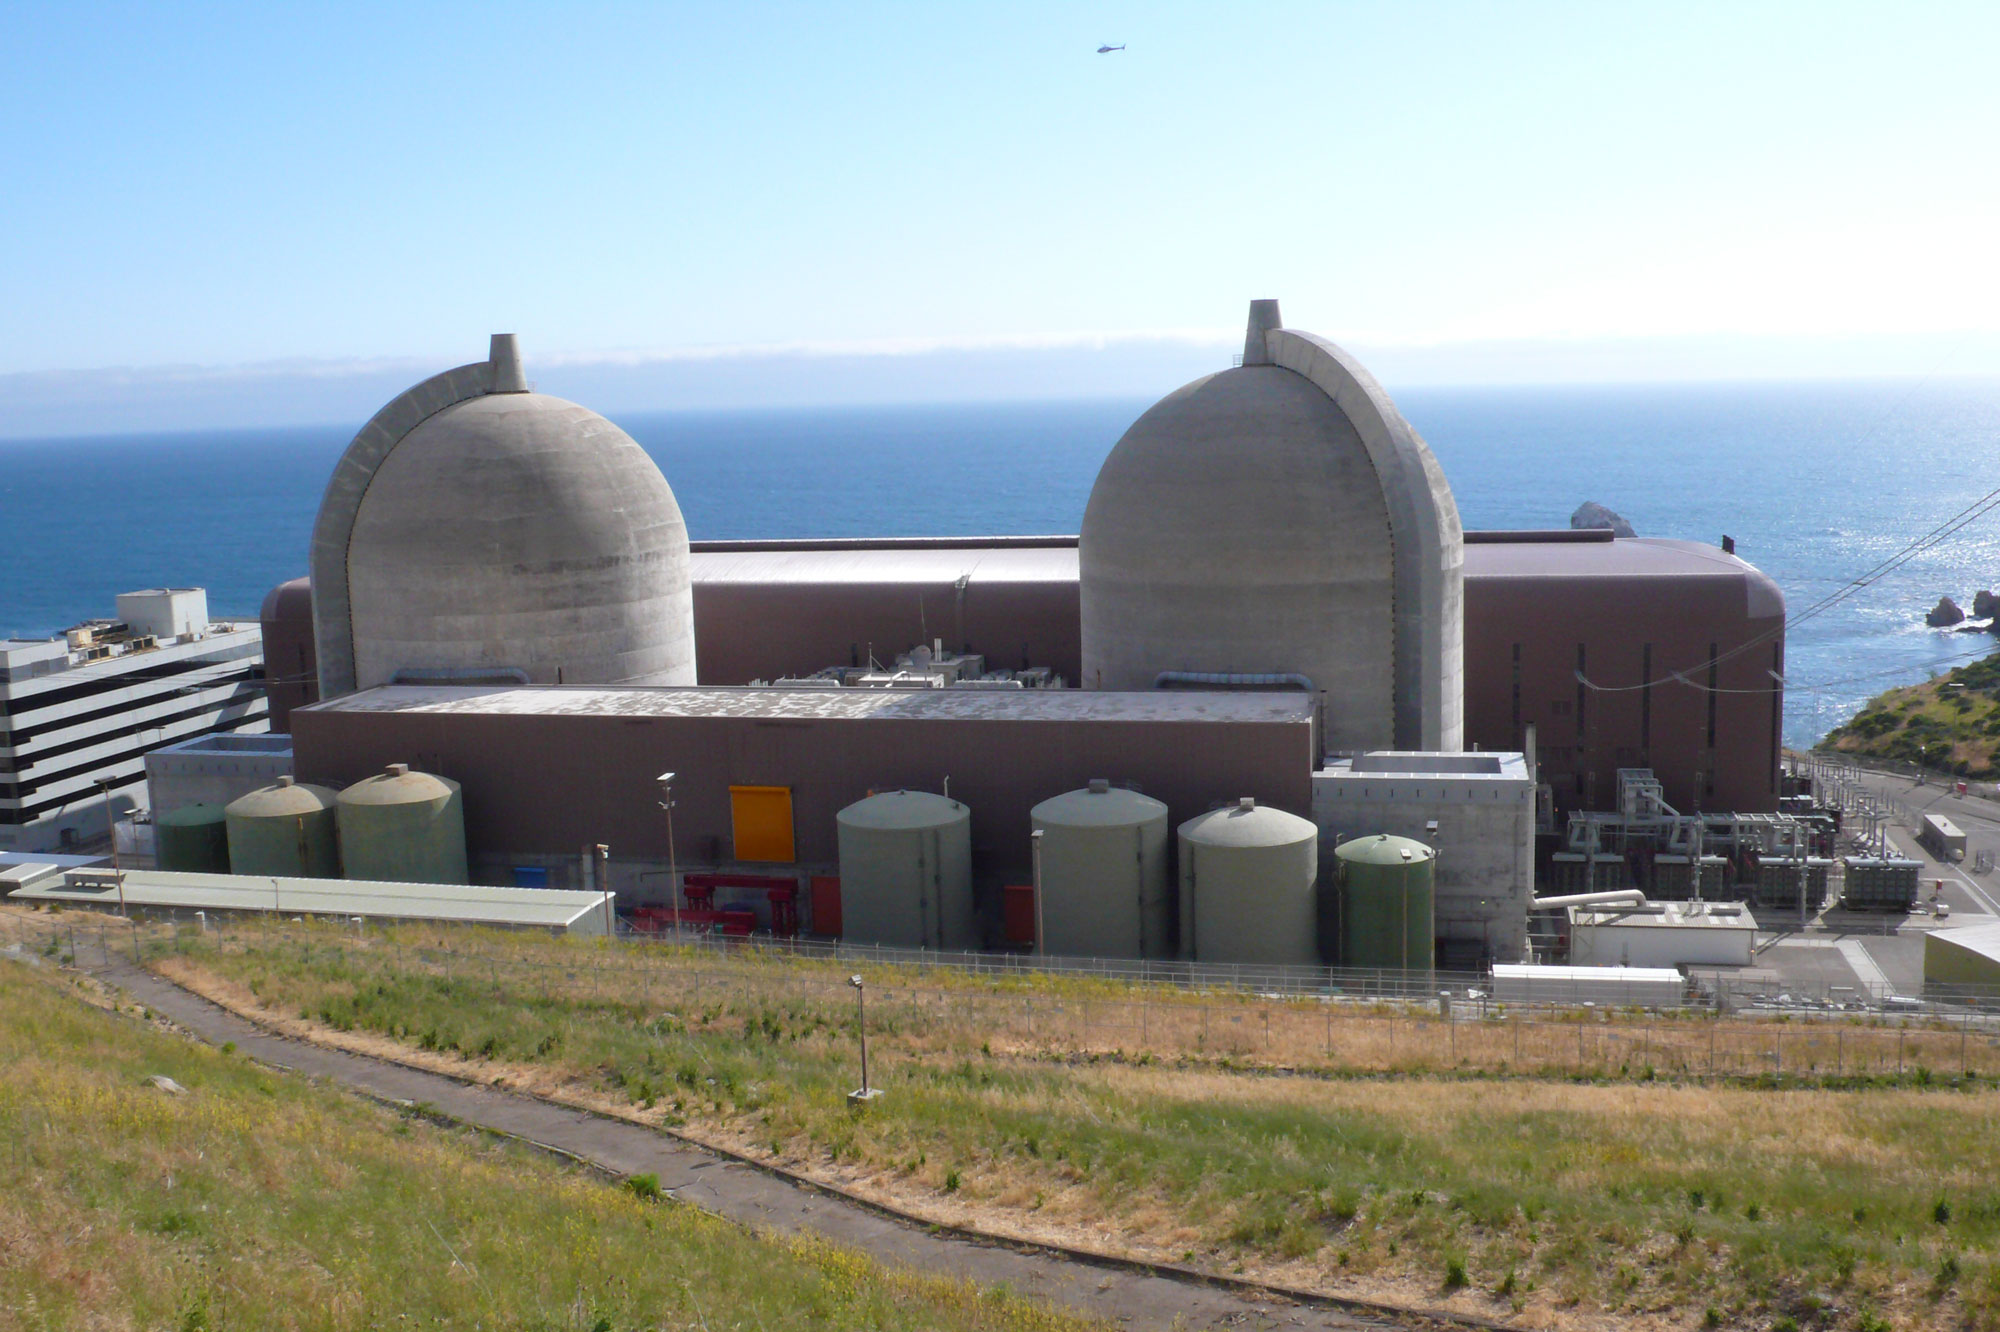 Photograph of the Diablo Canyon Nuclear plant showing two dome-like reactors and other structures. The ocean can be seen in the background.